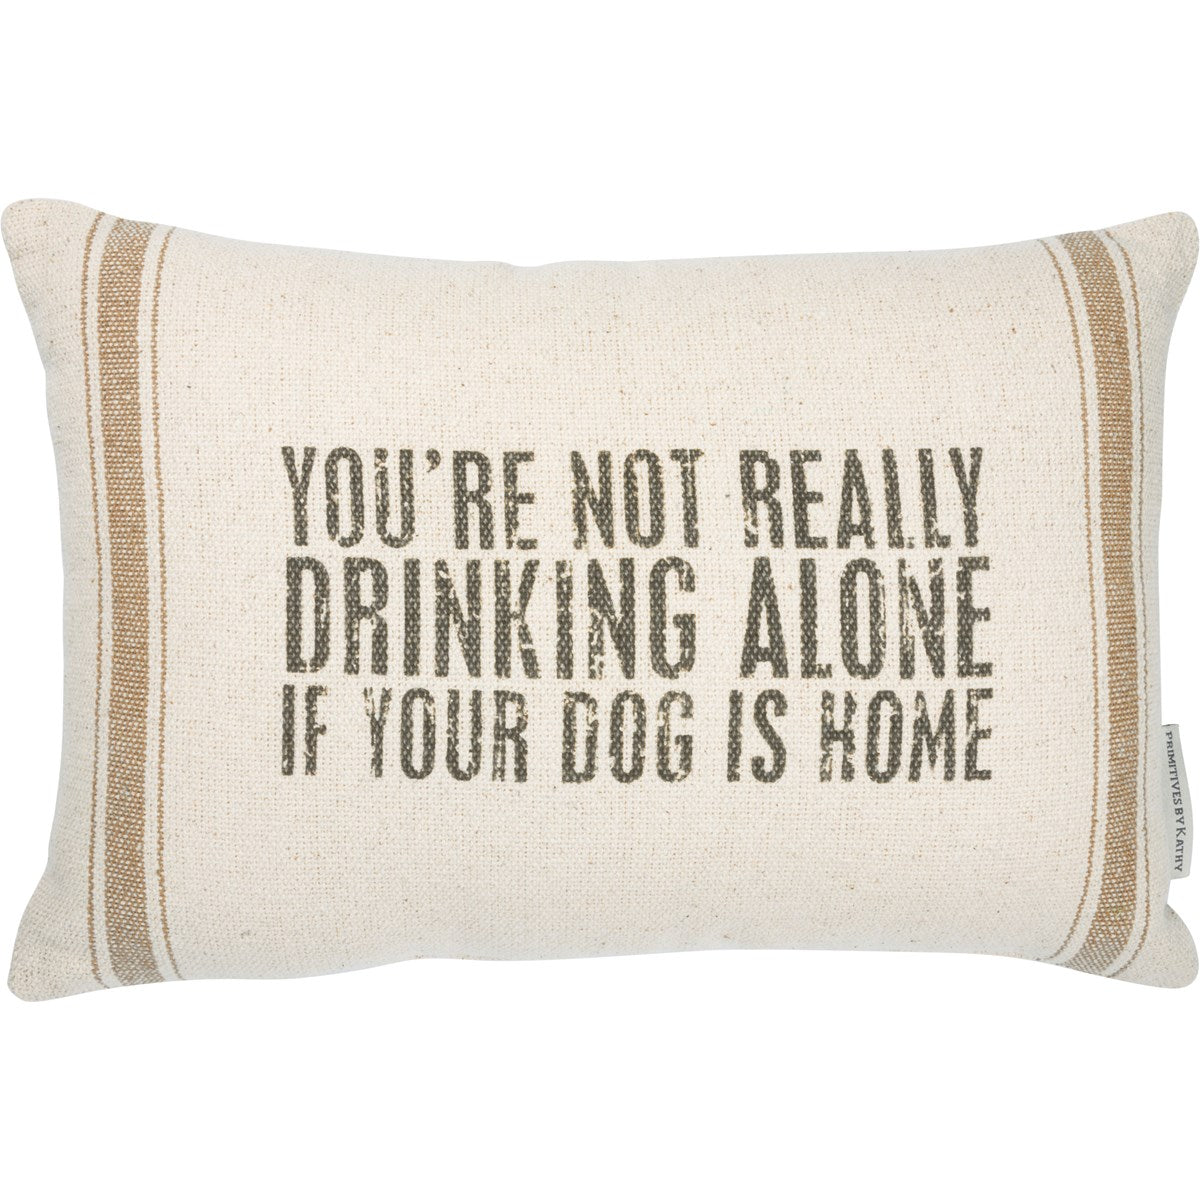 Pillow- You're not really drinking alone if your dog is home - Lake Dog and their people